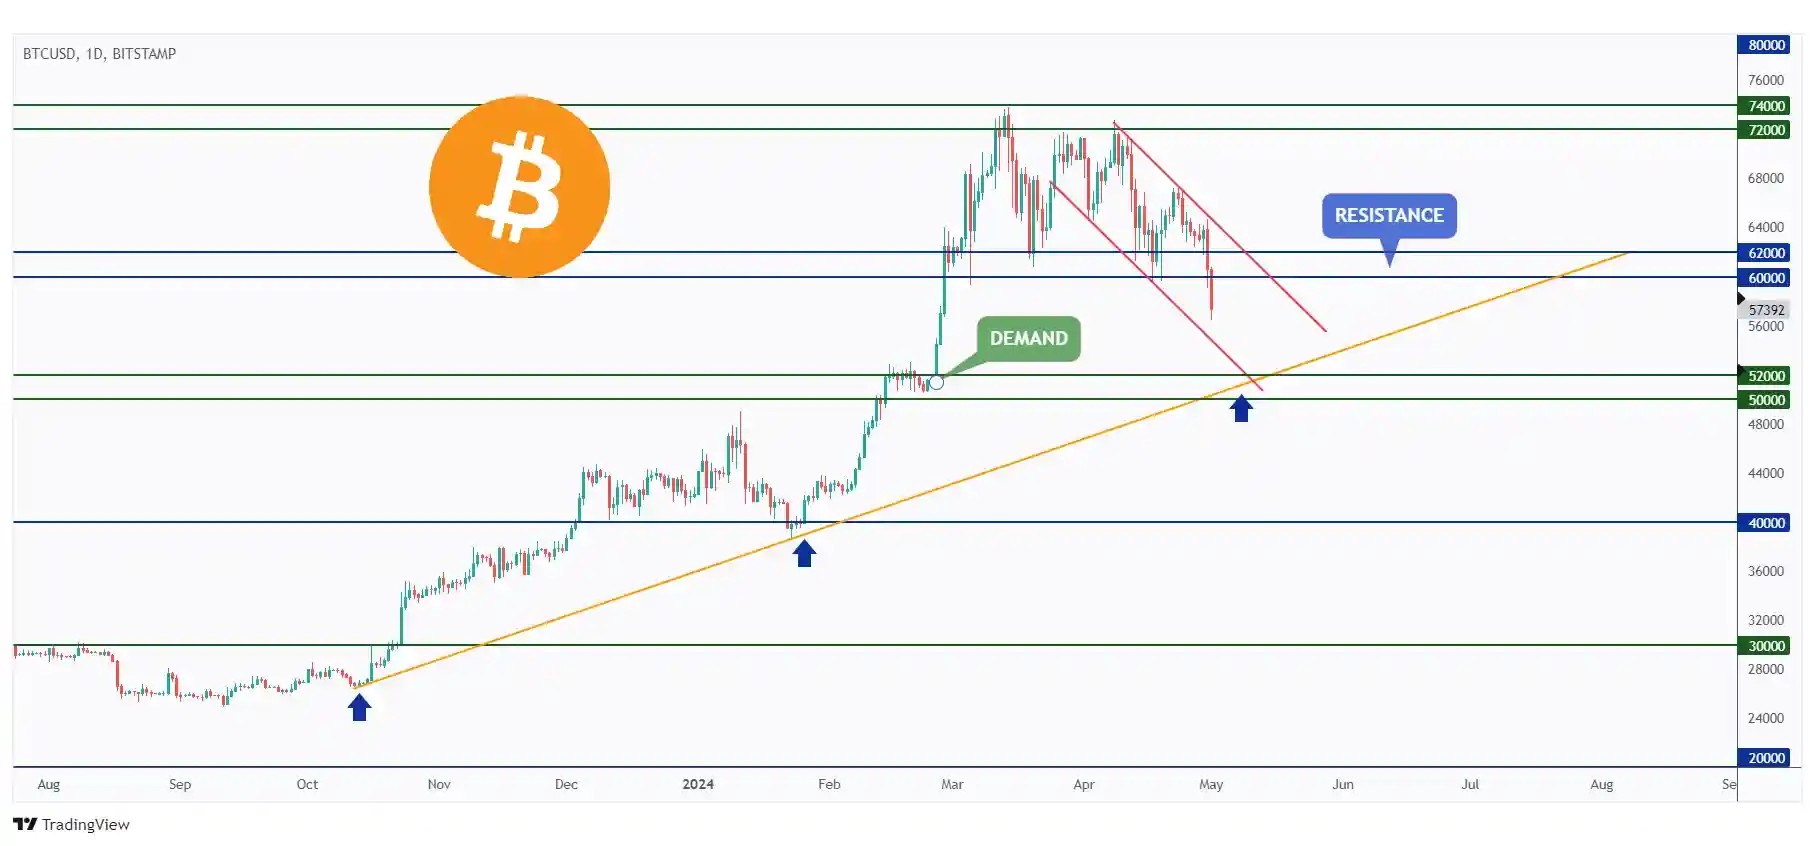 BTC daily chart overall bearish after breaking below the $60,000 support trading within a falling channel.